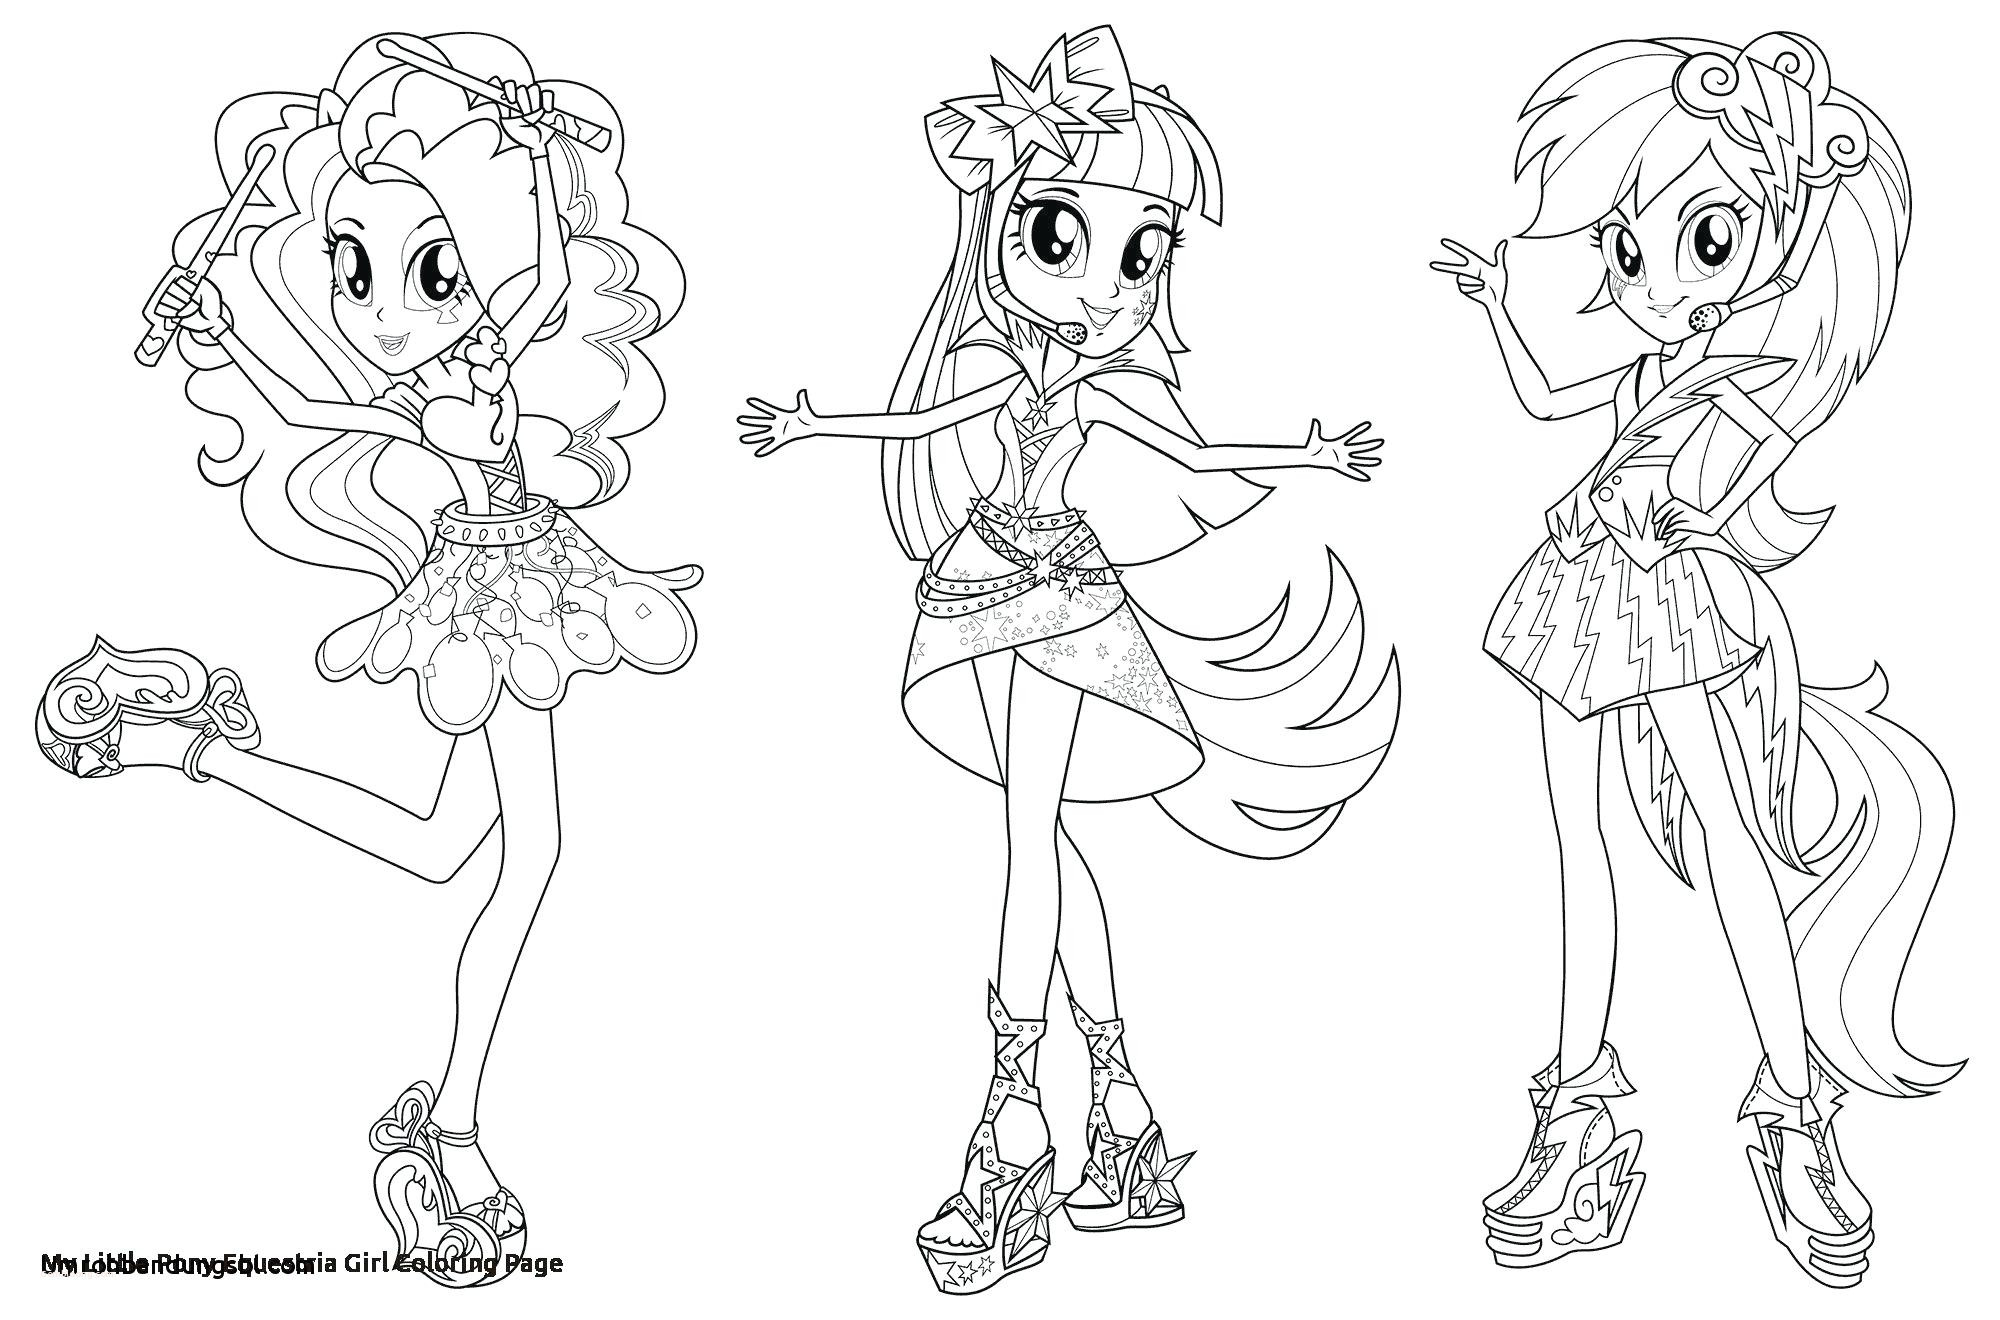 coloring pages : My Little Pony Coloring Book Youtube Lovely My Little Pony Coloring  Pages Equestria Girls My Little Pony Coloring Book Youtube ~ peak